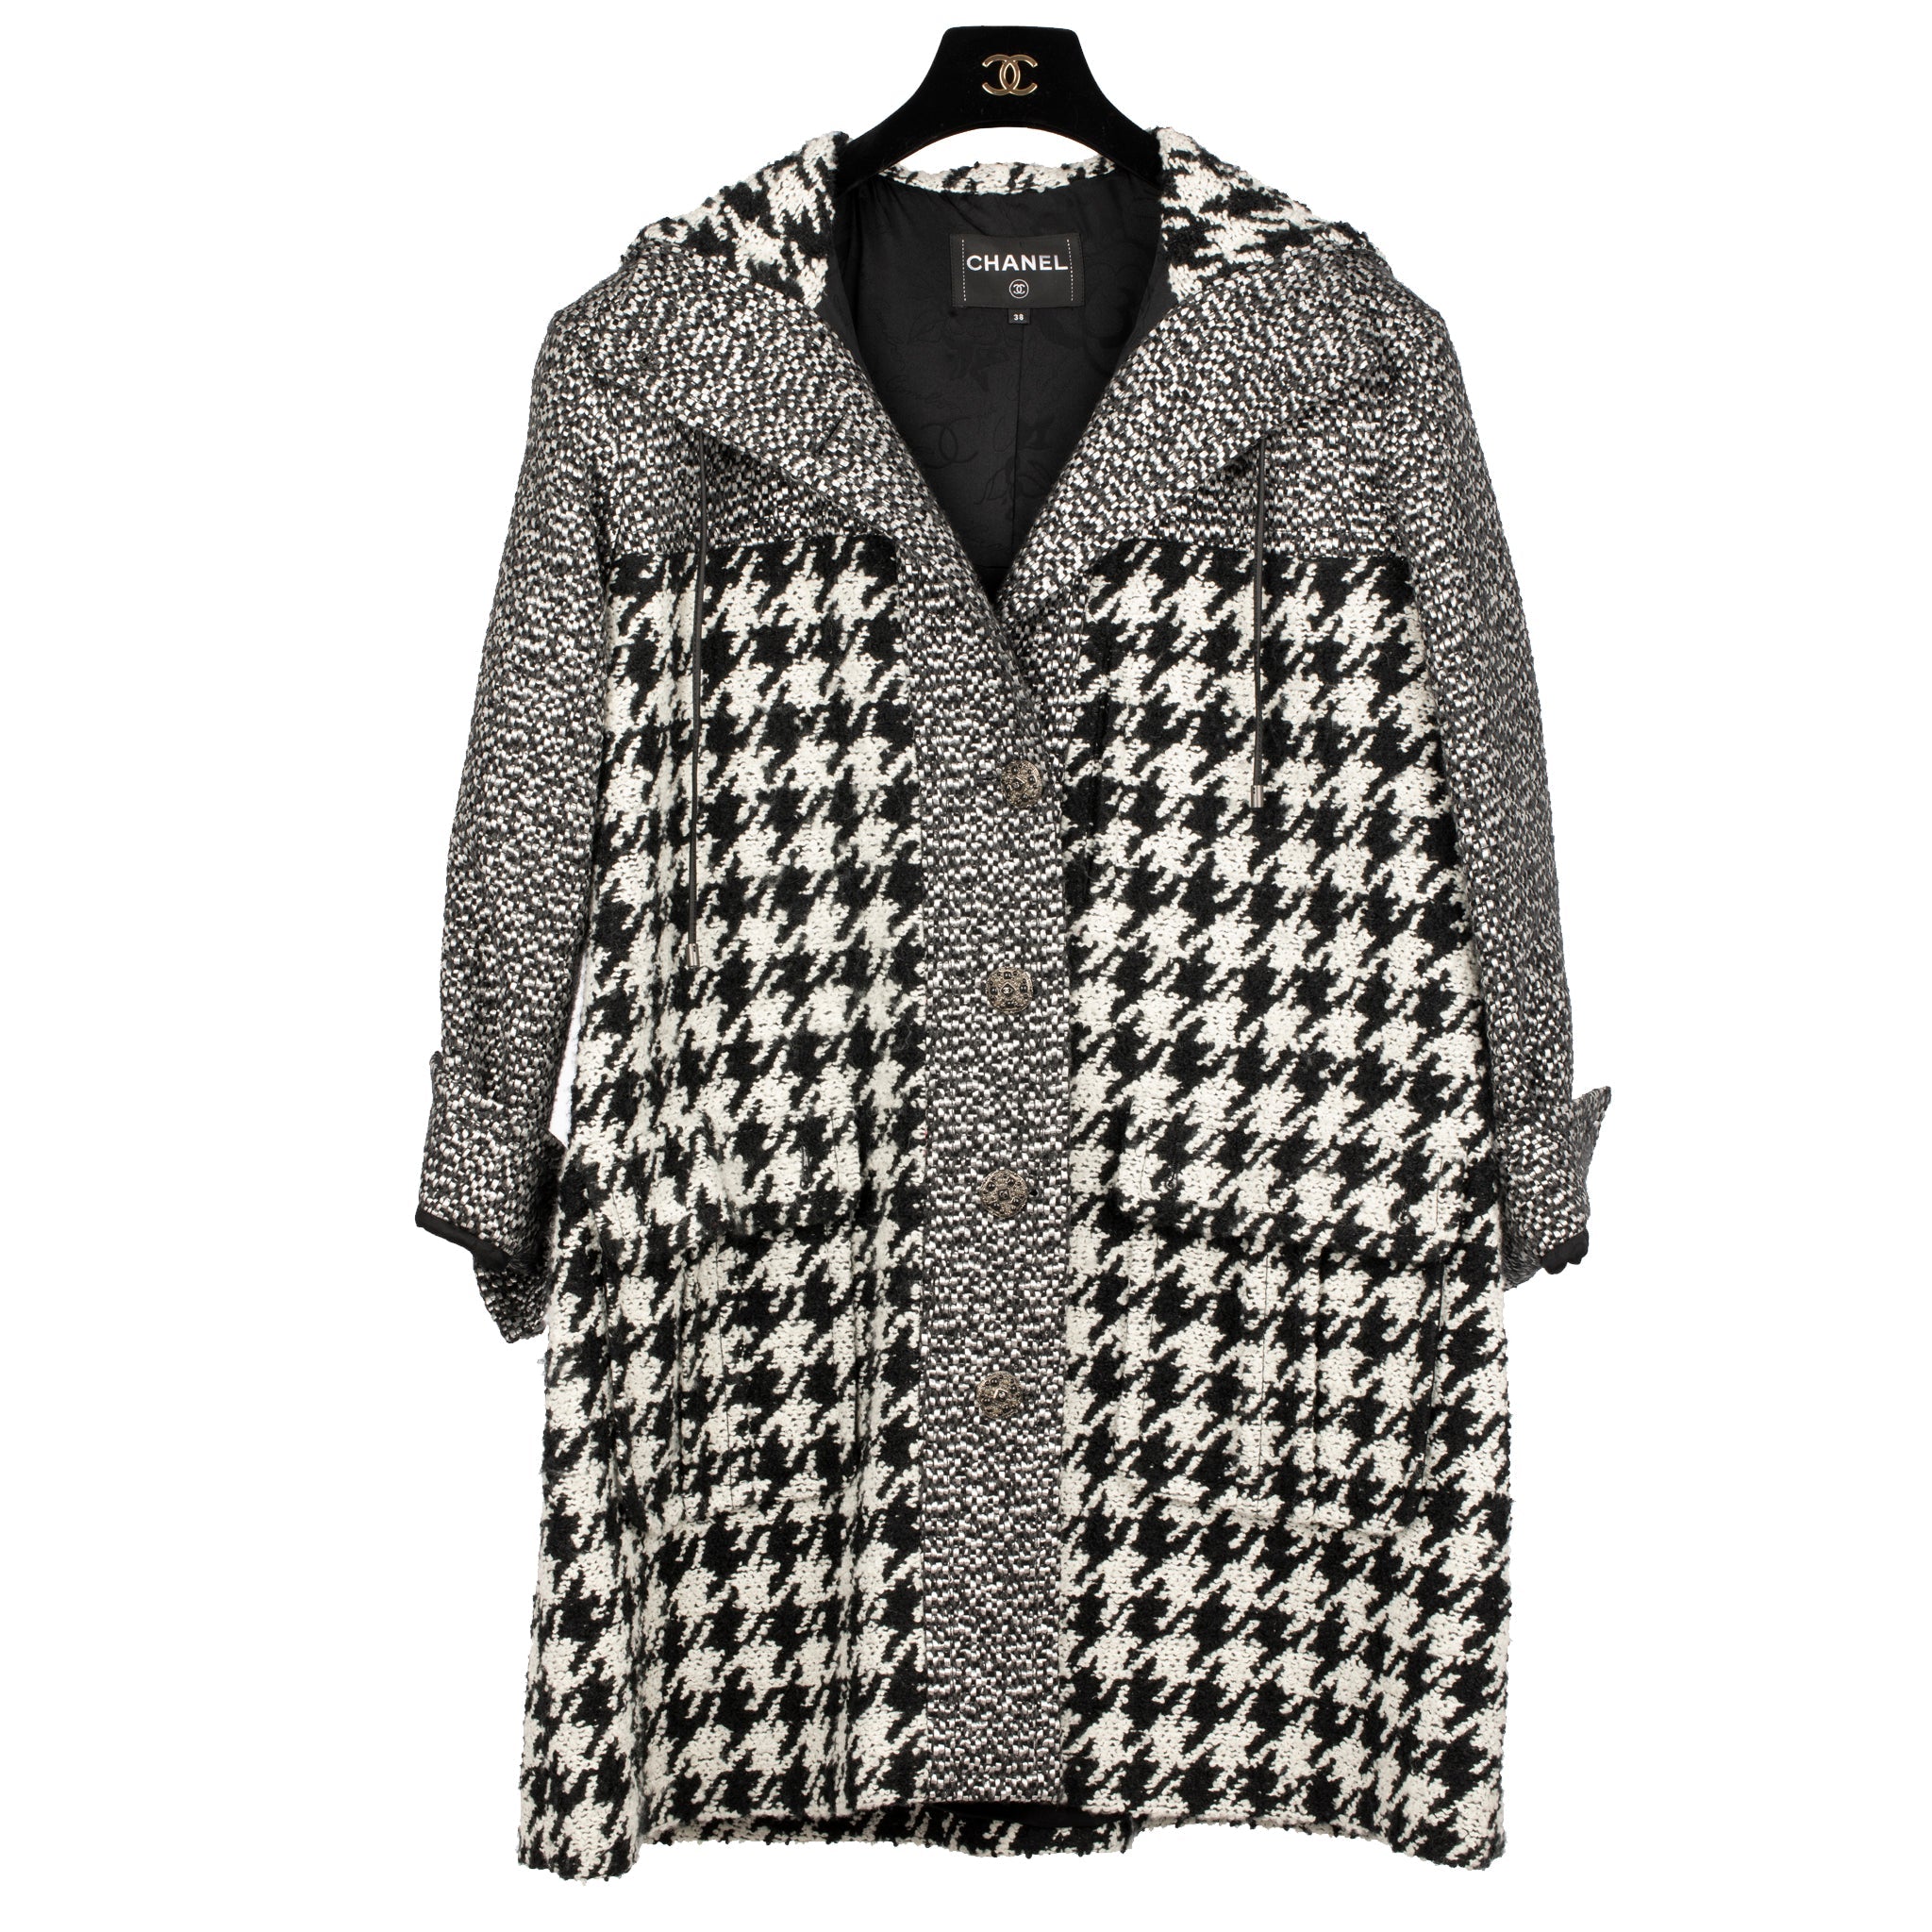 Chanel Black & White Oversized Houndstooth Coat With Hood 38 Fr - On Repeat